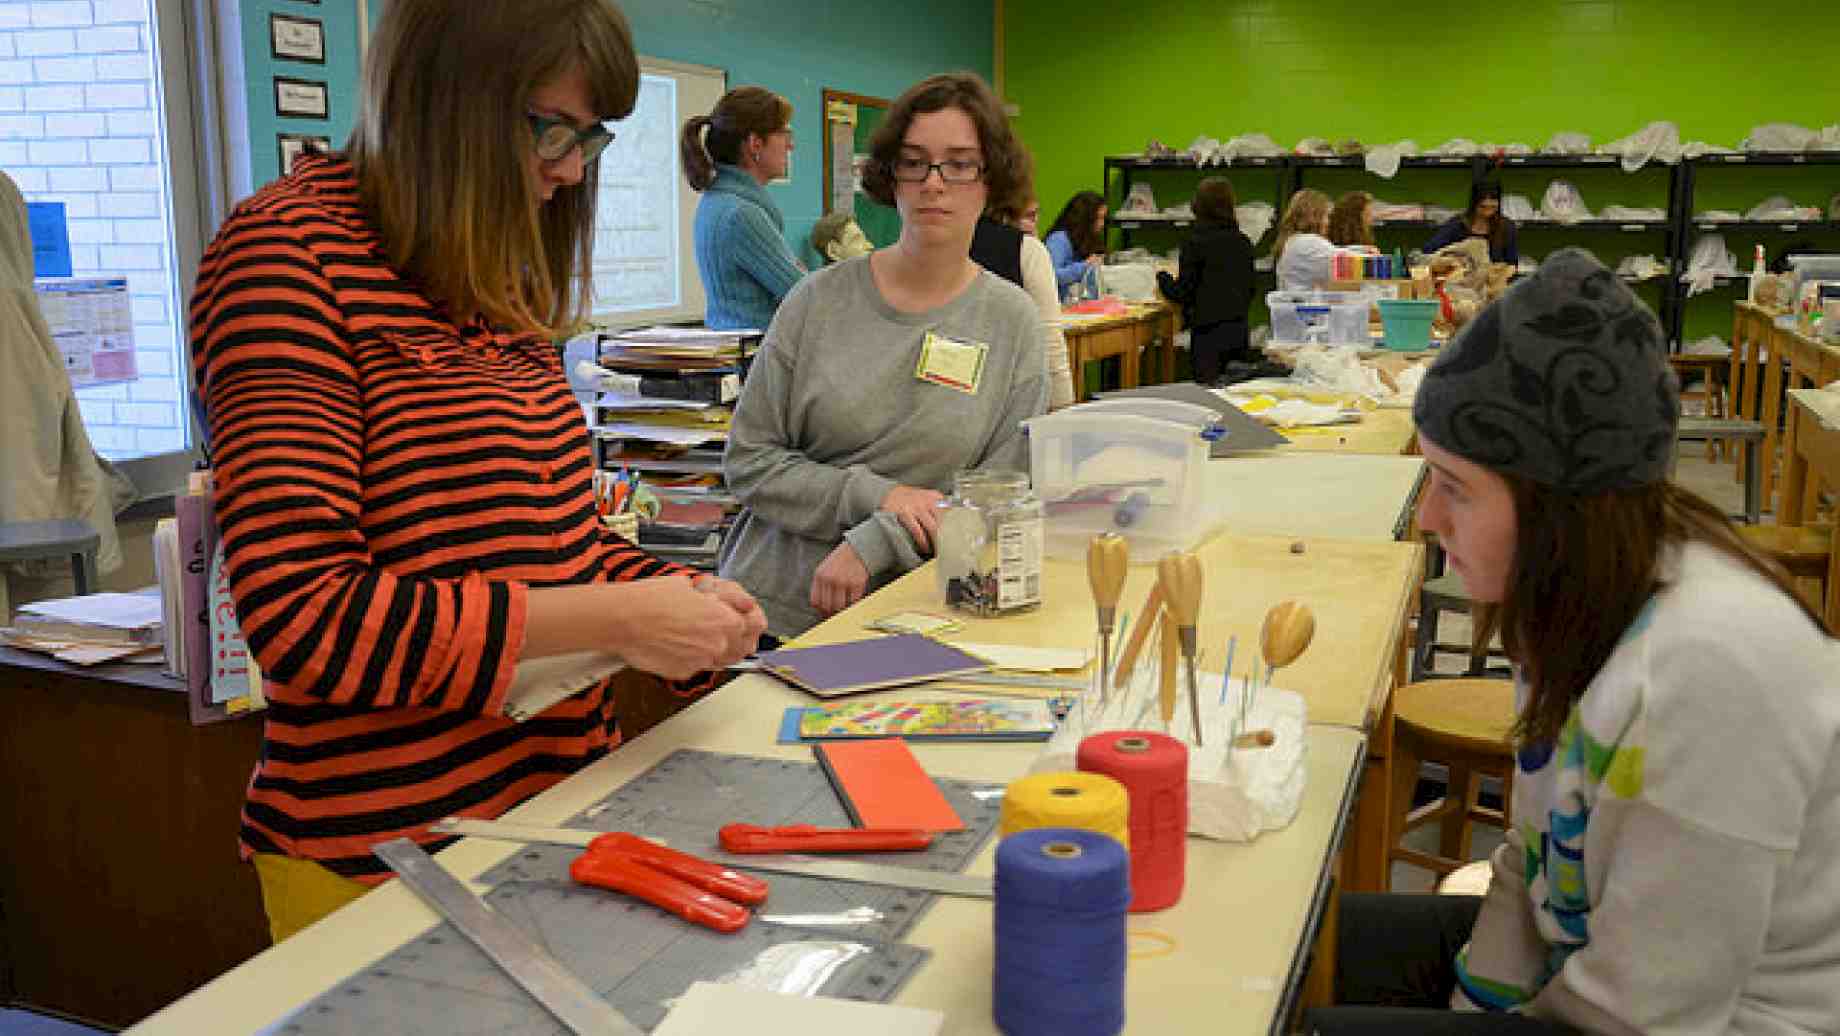 Graduate art education studnt demonstrating bookbinding techniques during a local field experience.